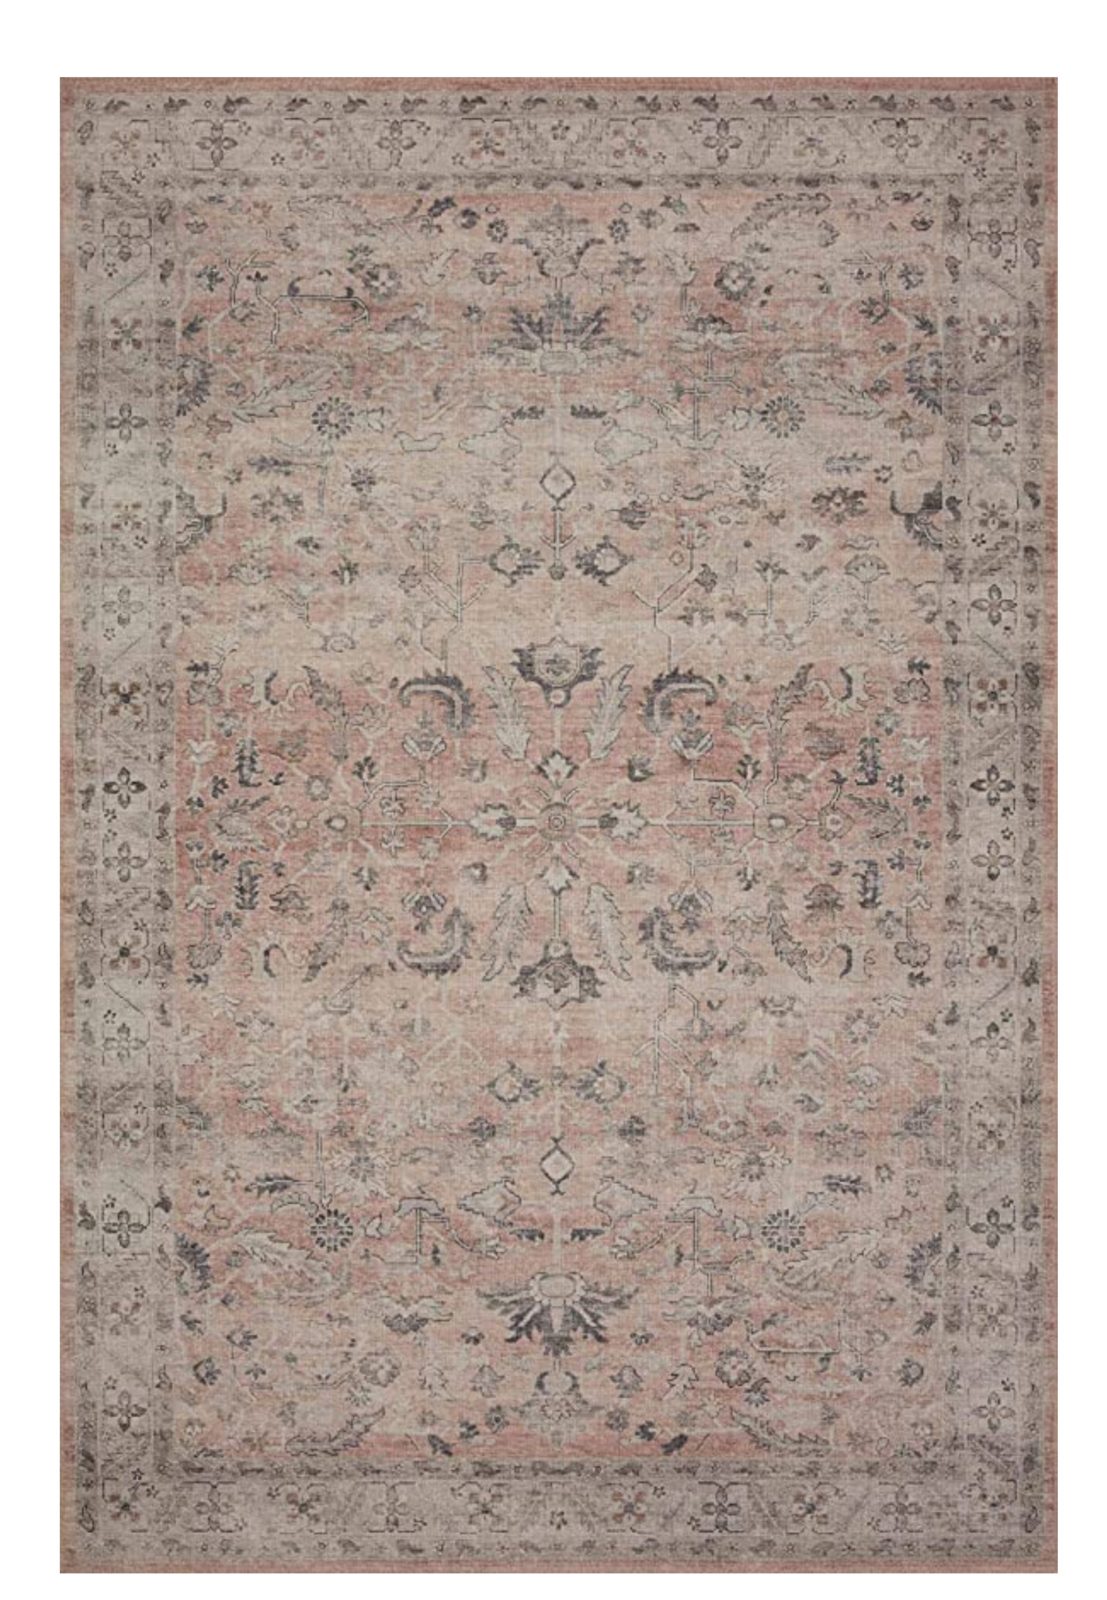 5 Stylish, Durable Rugs That Won't Break the Bank | Wit & Delight